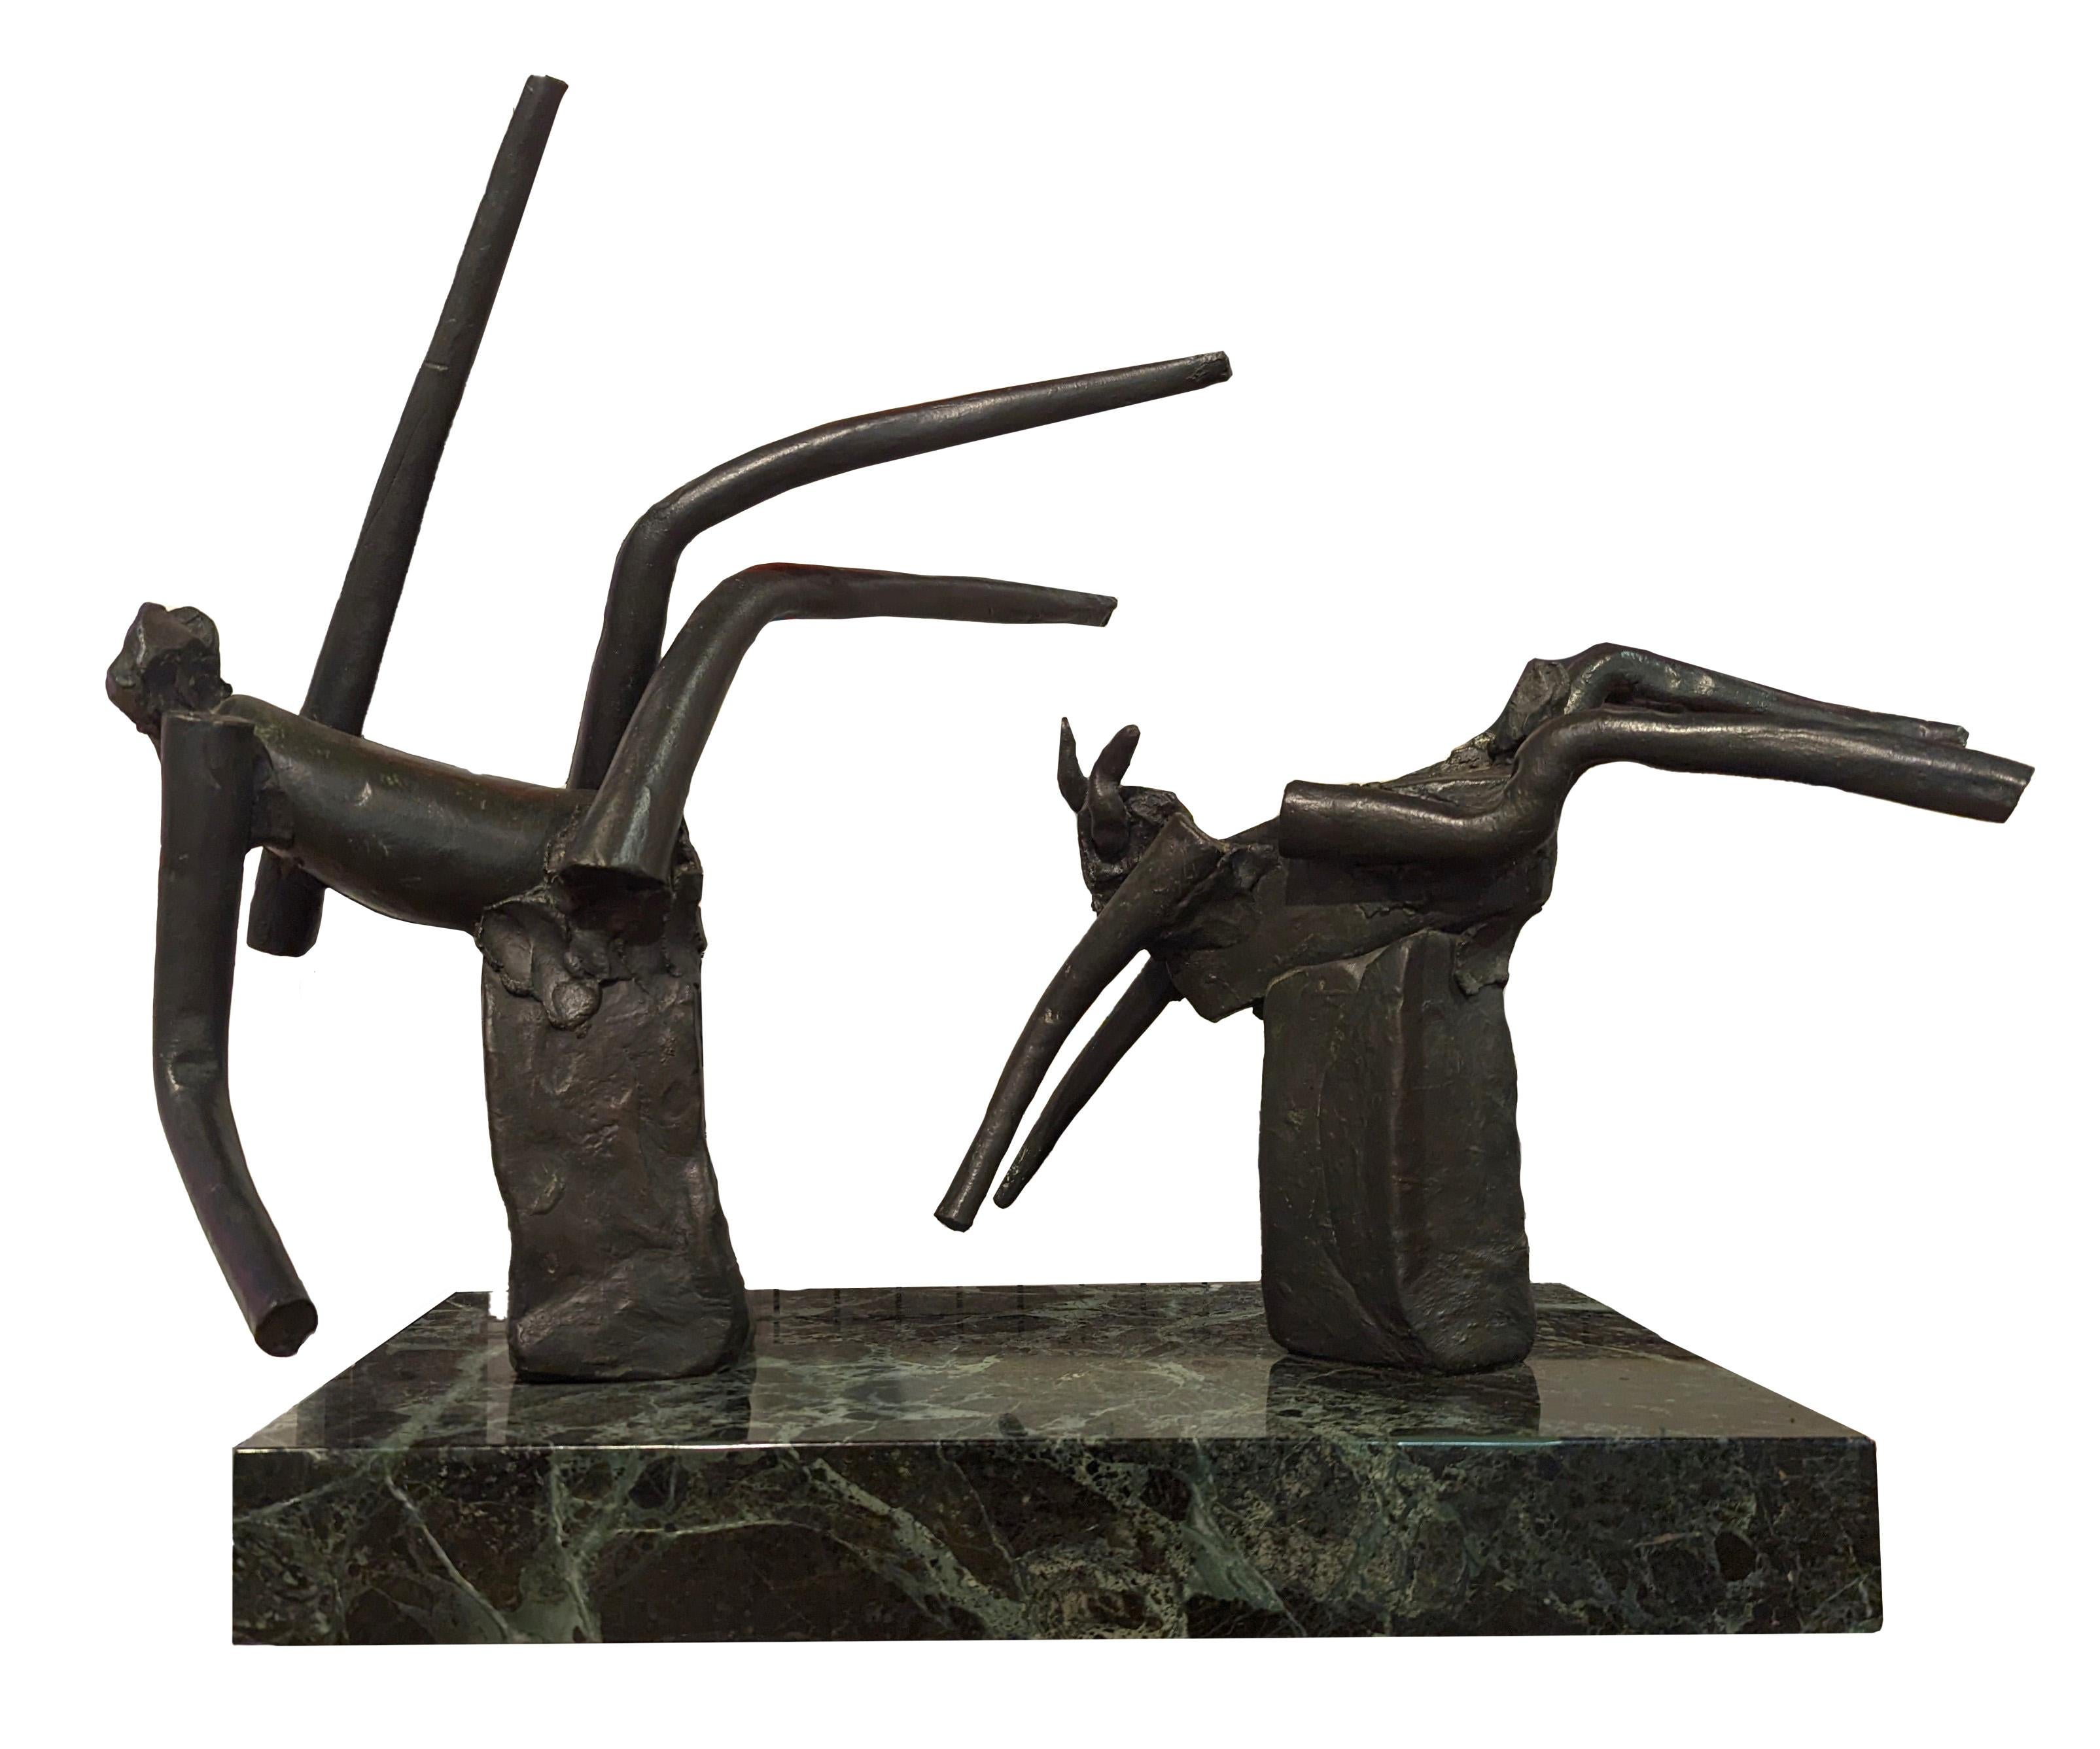 Reuben Nakian Figurative Sculpture - "Nymph and Goat" Modern Abstract Mythological Bronze and Marble Sculpture